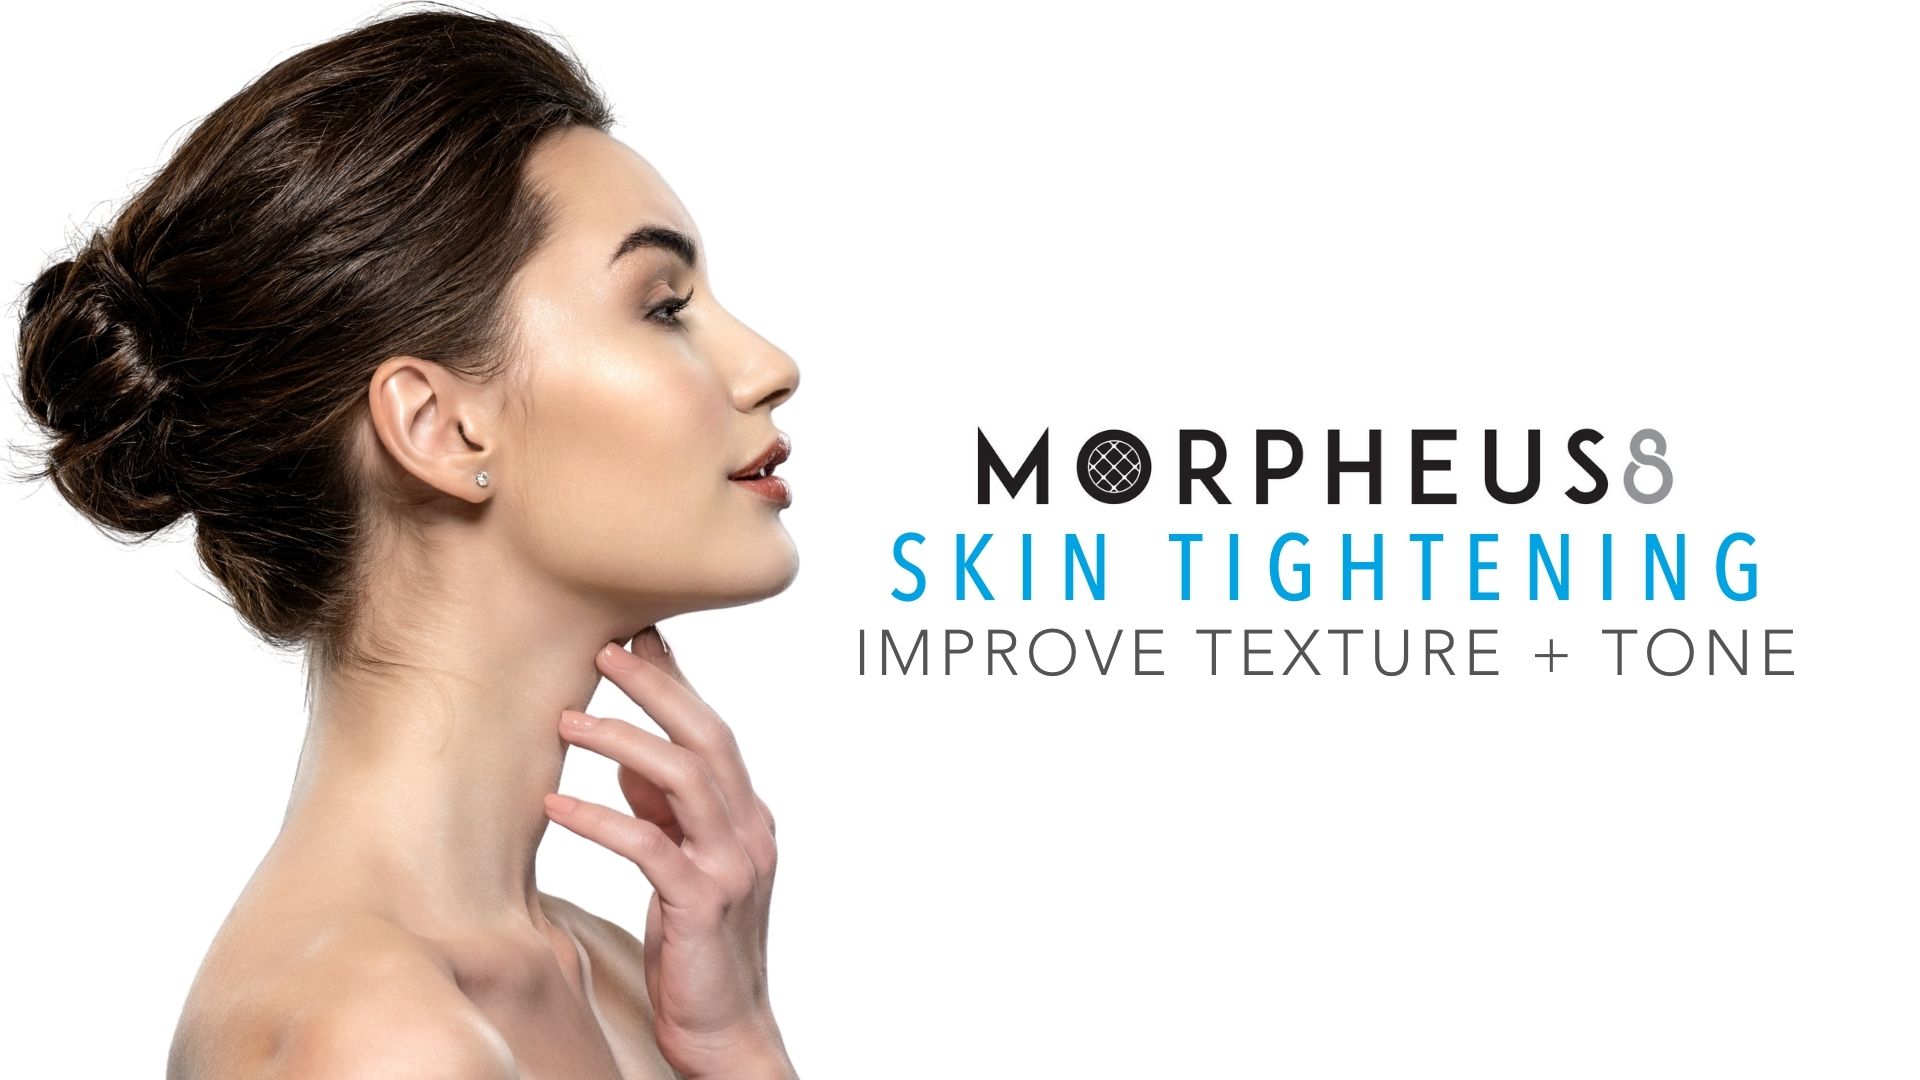 Woman with beautiful skin holding her neck promoting a Morpheus 8 skin tightening treatment.